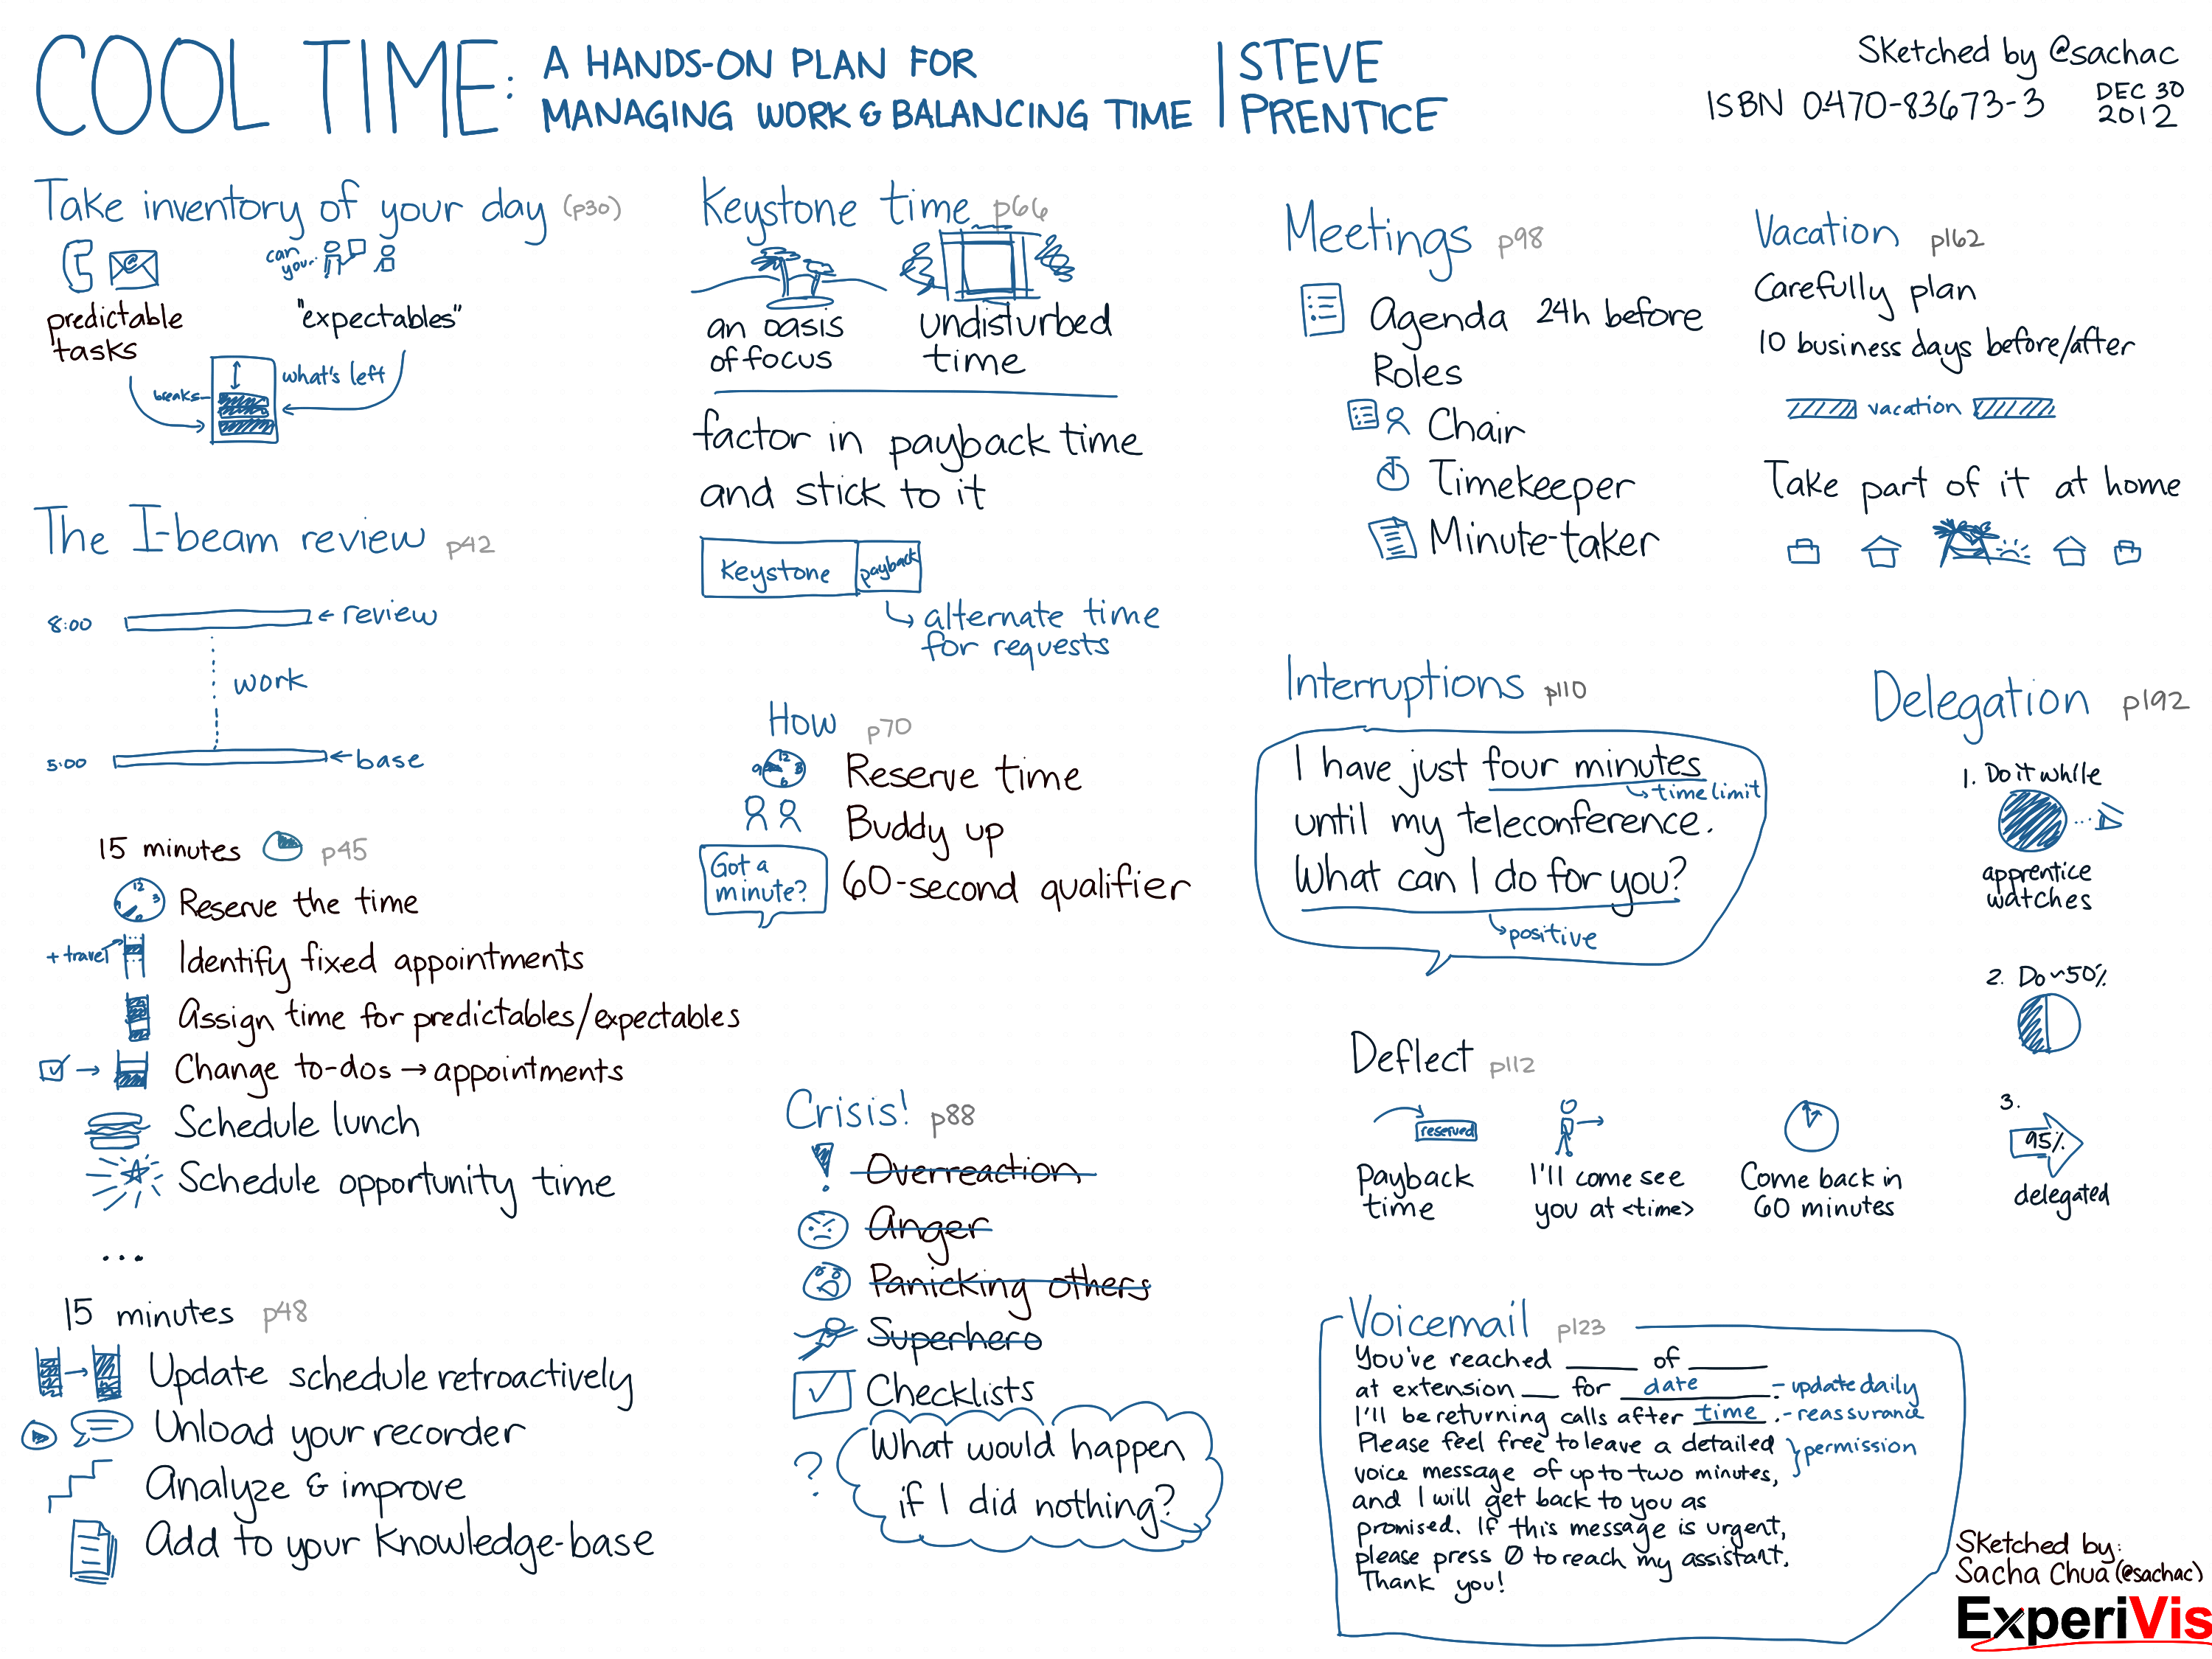 2012-12-30 Book - Cool Time - A Hands-on Plan for Managing Work and Balancing Time - Steve Prentice